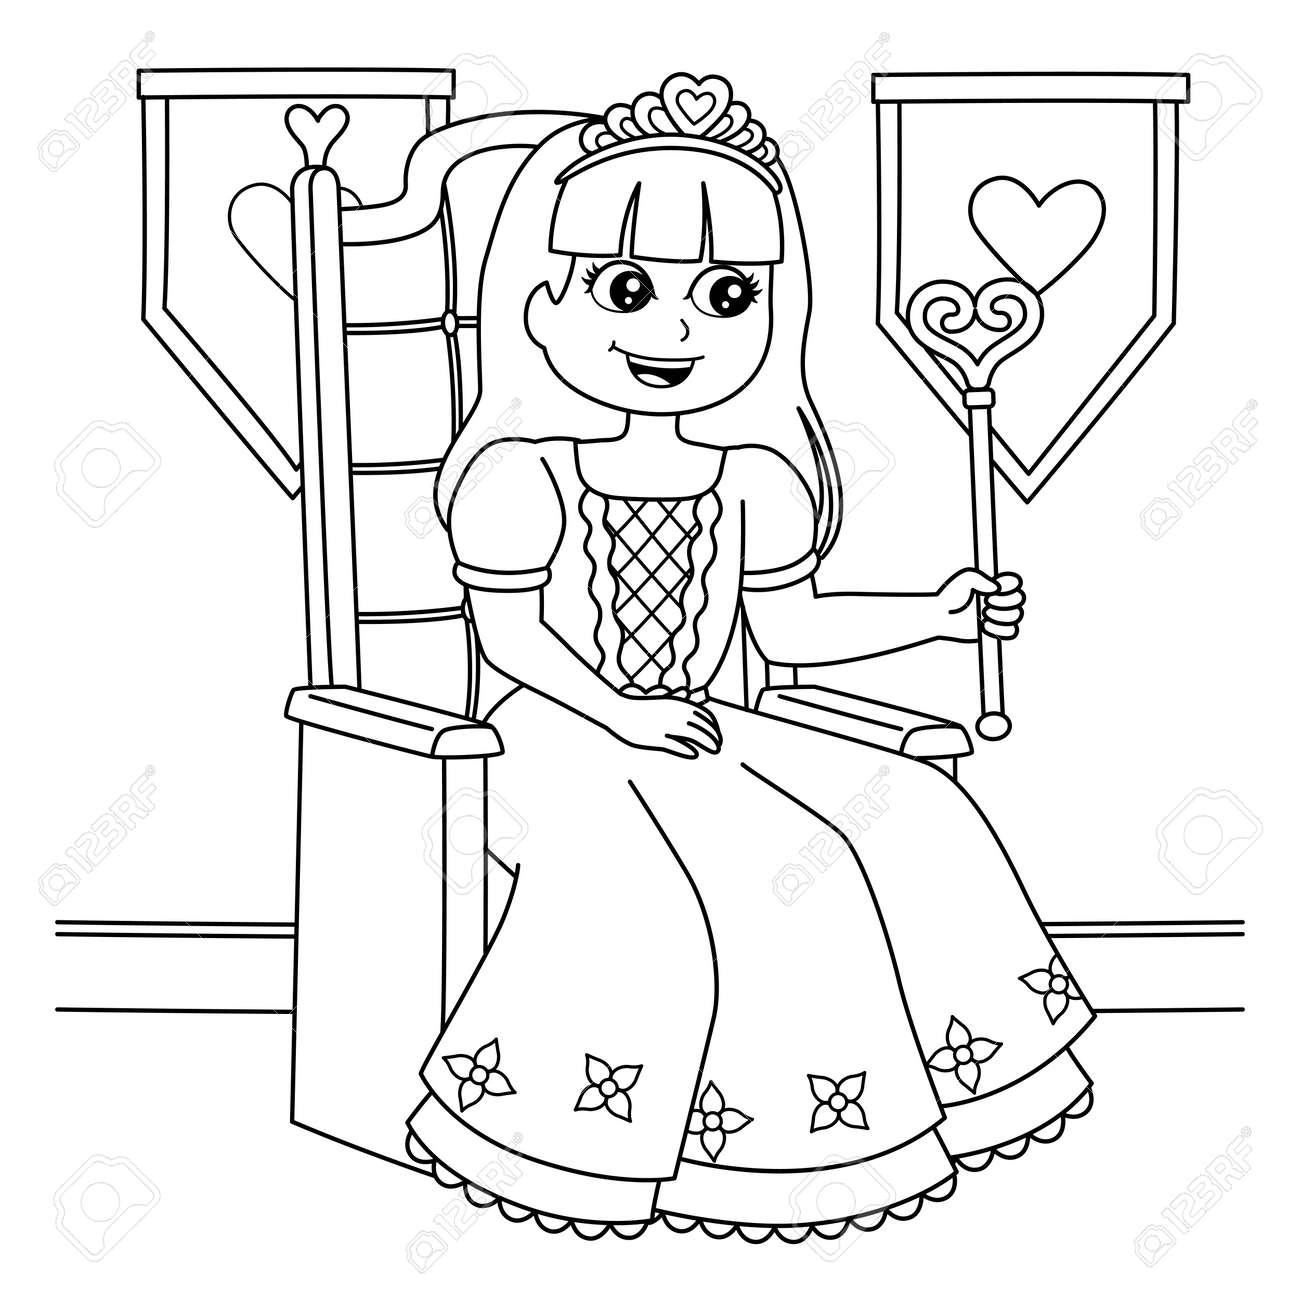 Princess coloring page for kids royalty free svg cliparts vectors and stock illustration image